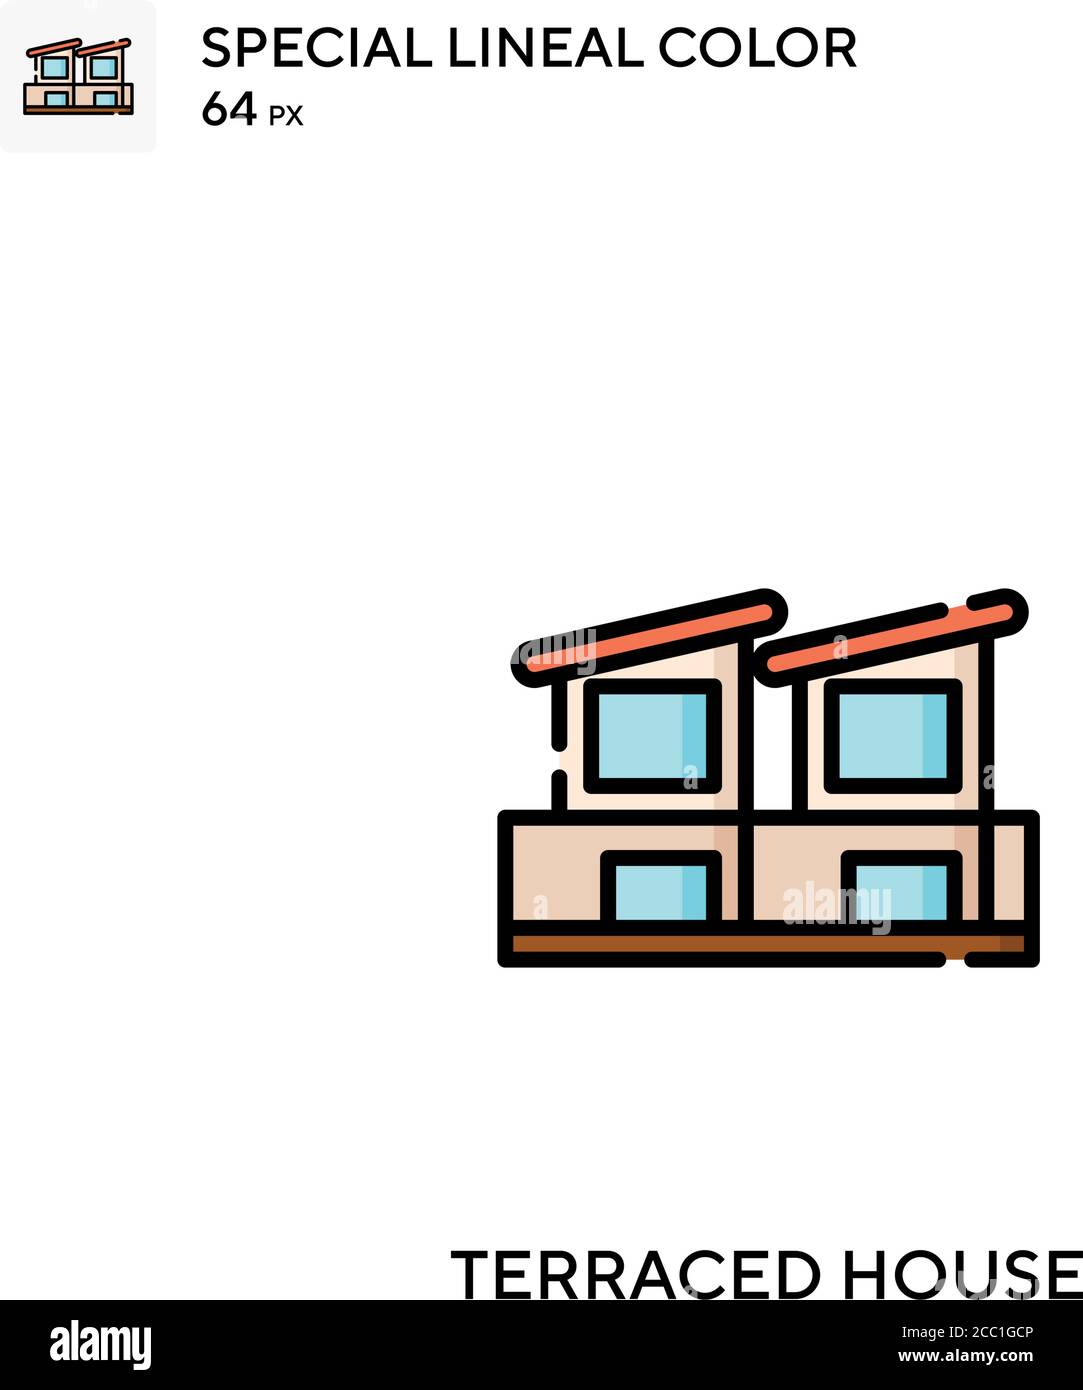 Terraced house Special lineal color vector icon. Terraced house icons for your business project Stock Vector